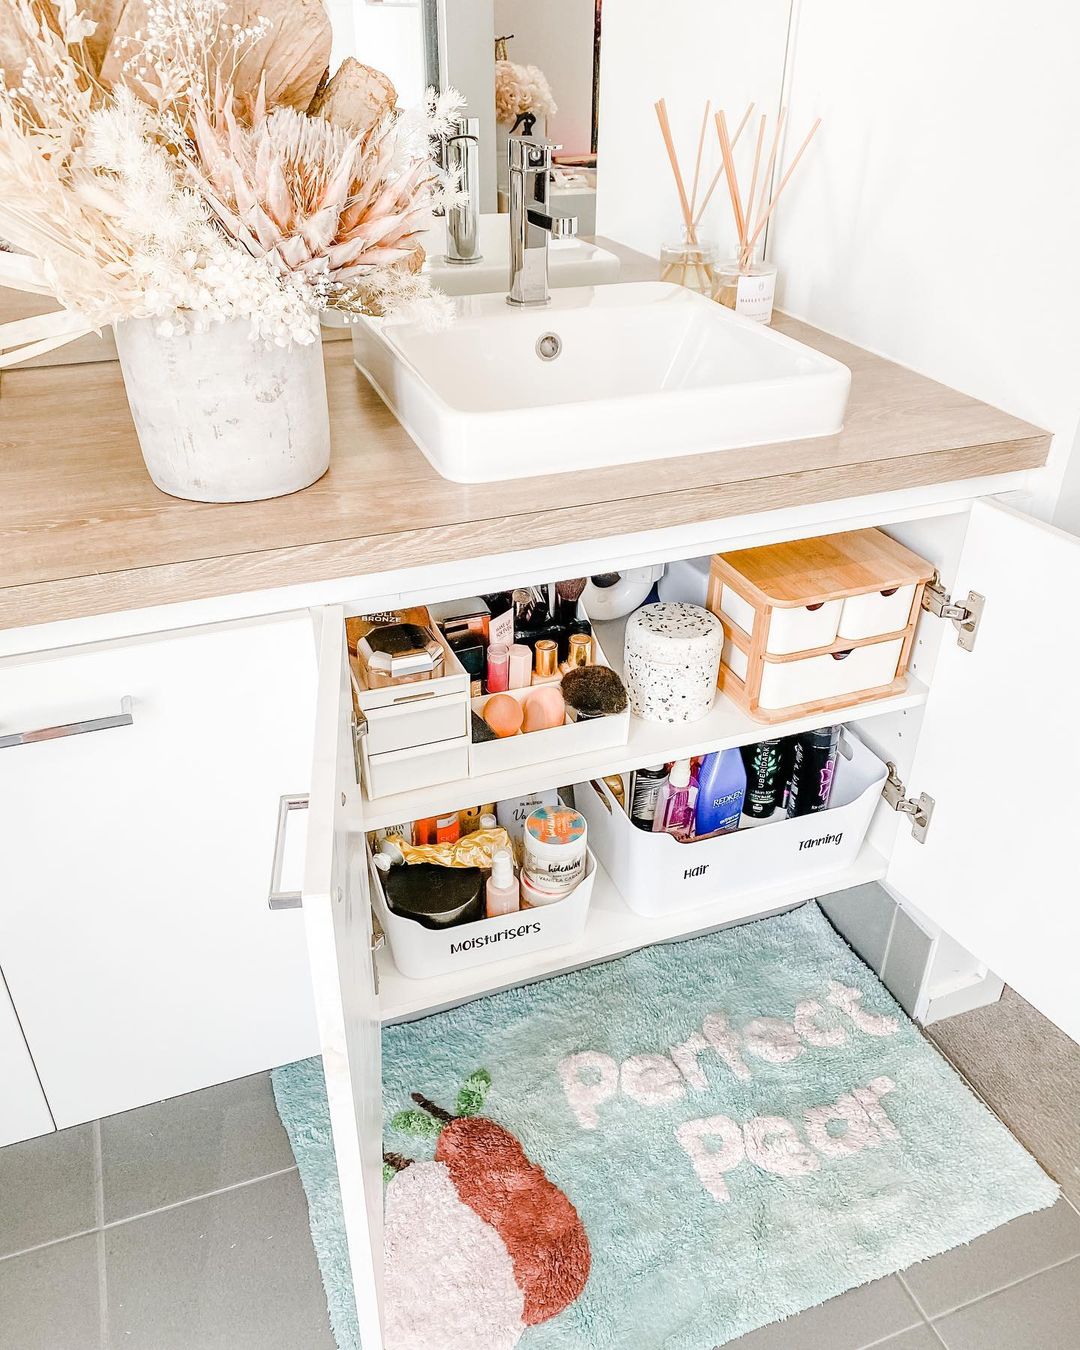 Under-the-sink doors are open to reveal a clean and organized storage area. Photo by Instagram user @ashleejayinteriors.